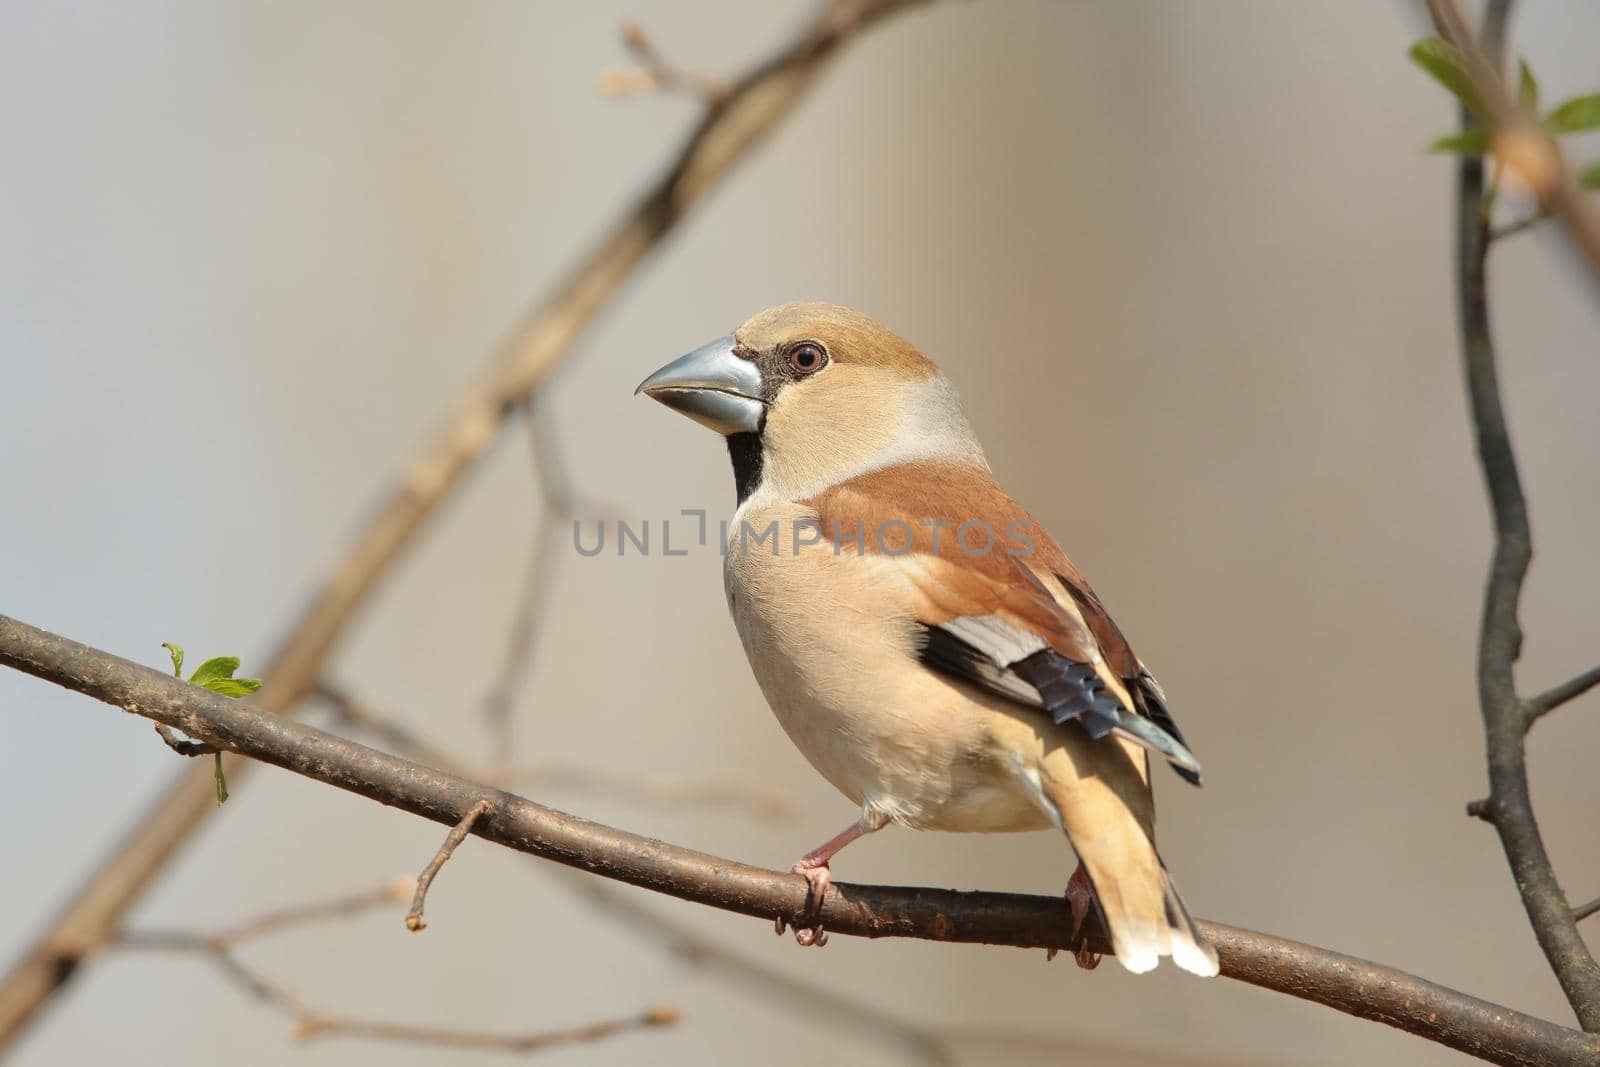 Hawfinch (Coccothraustes coccothrautes) on a twig.